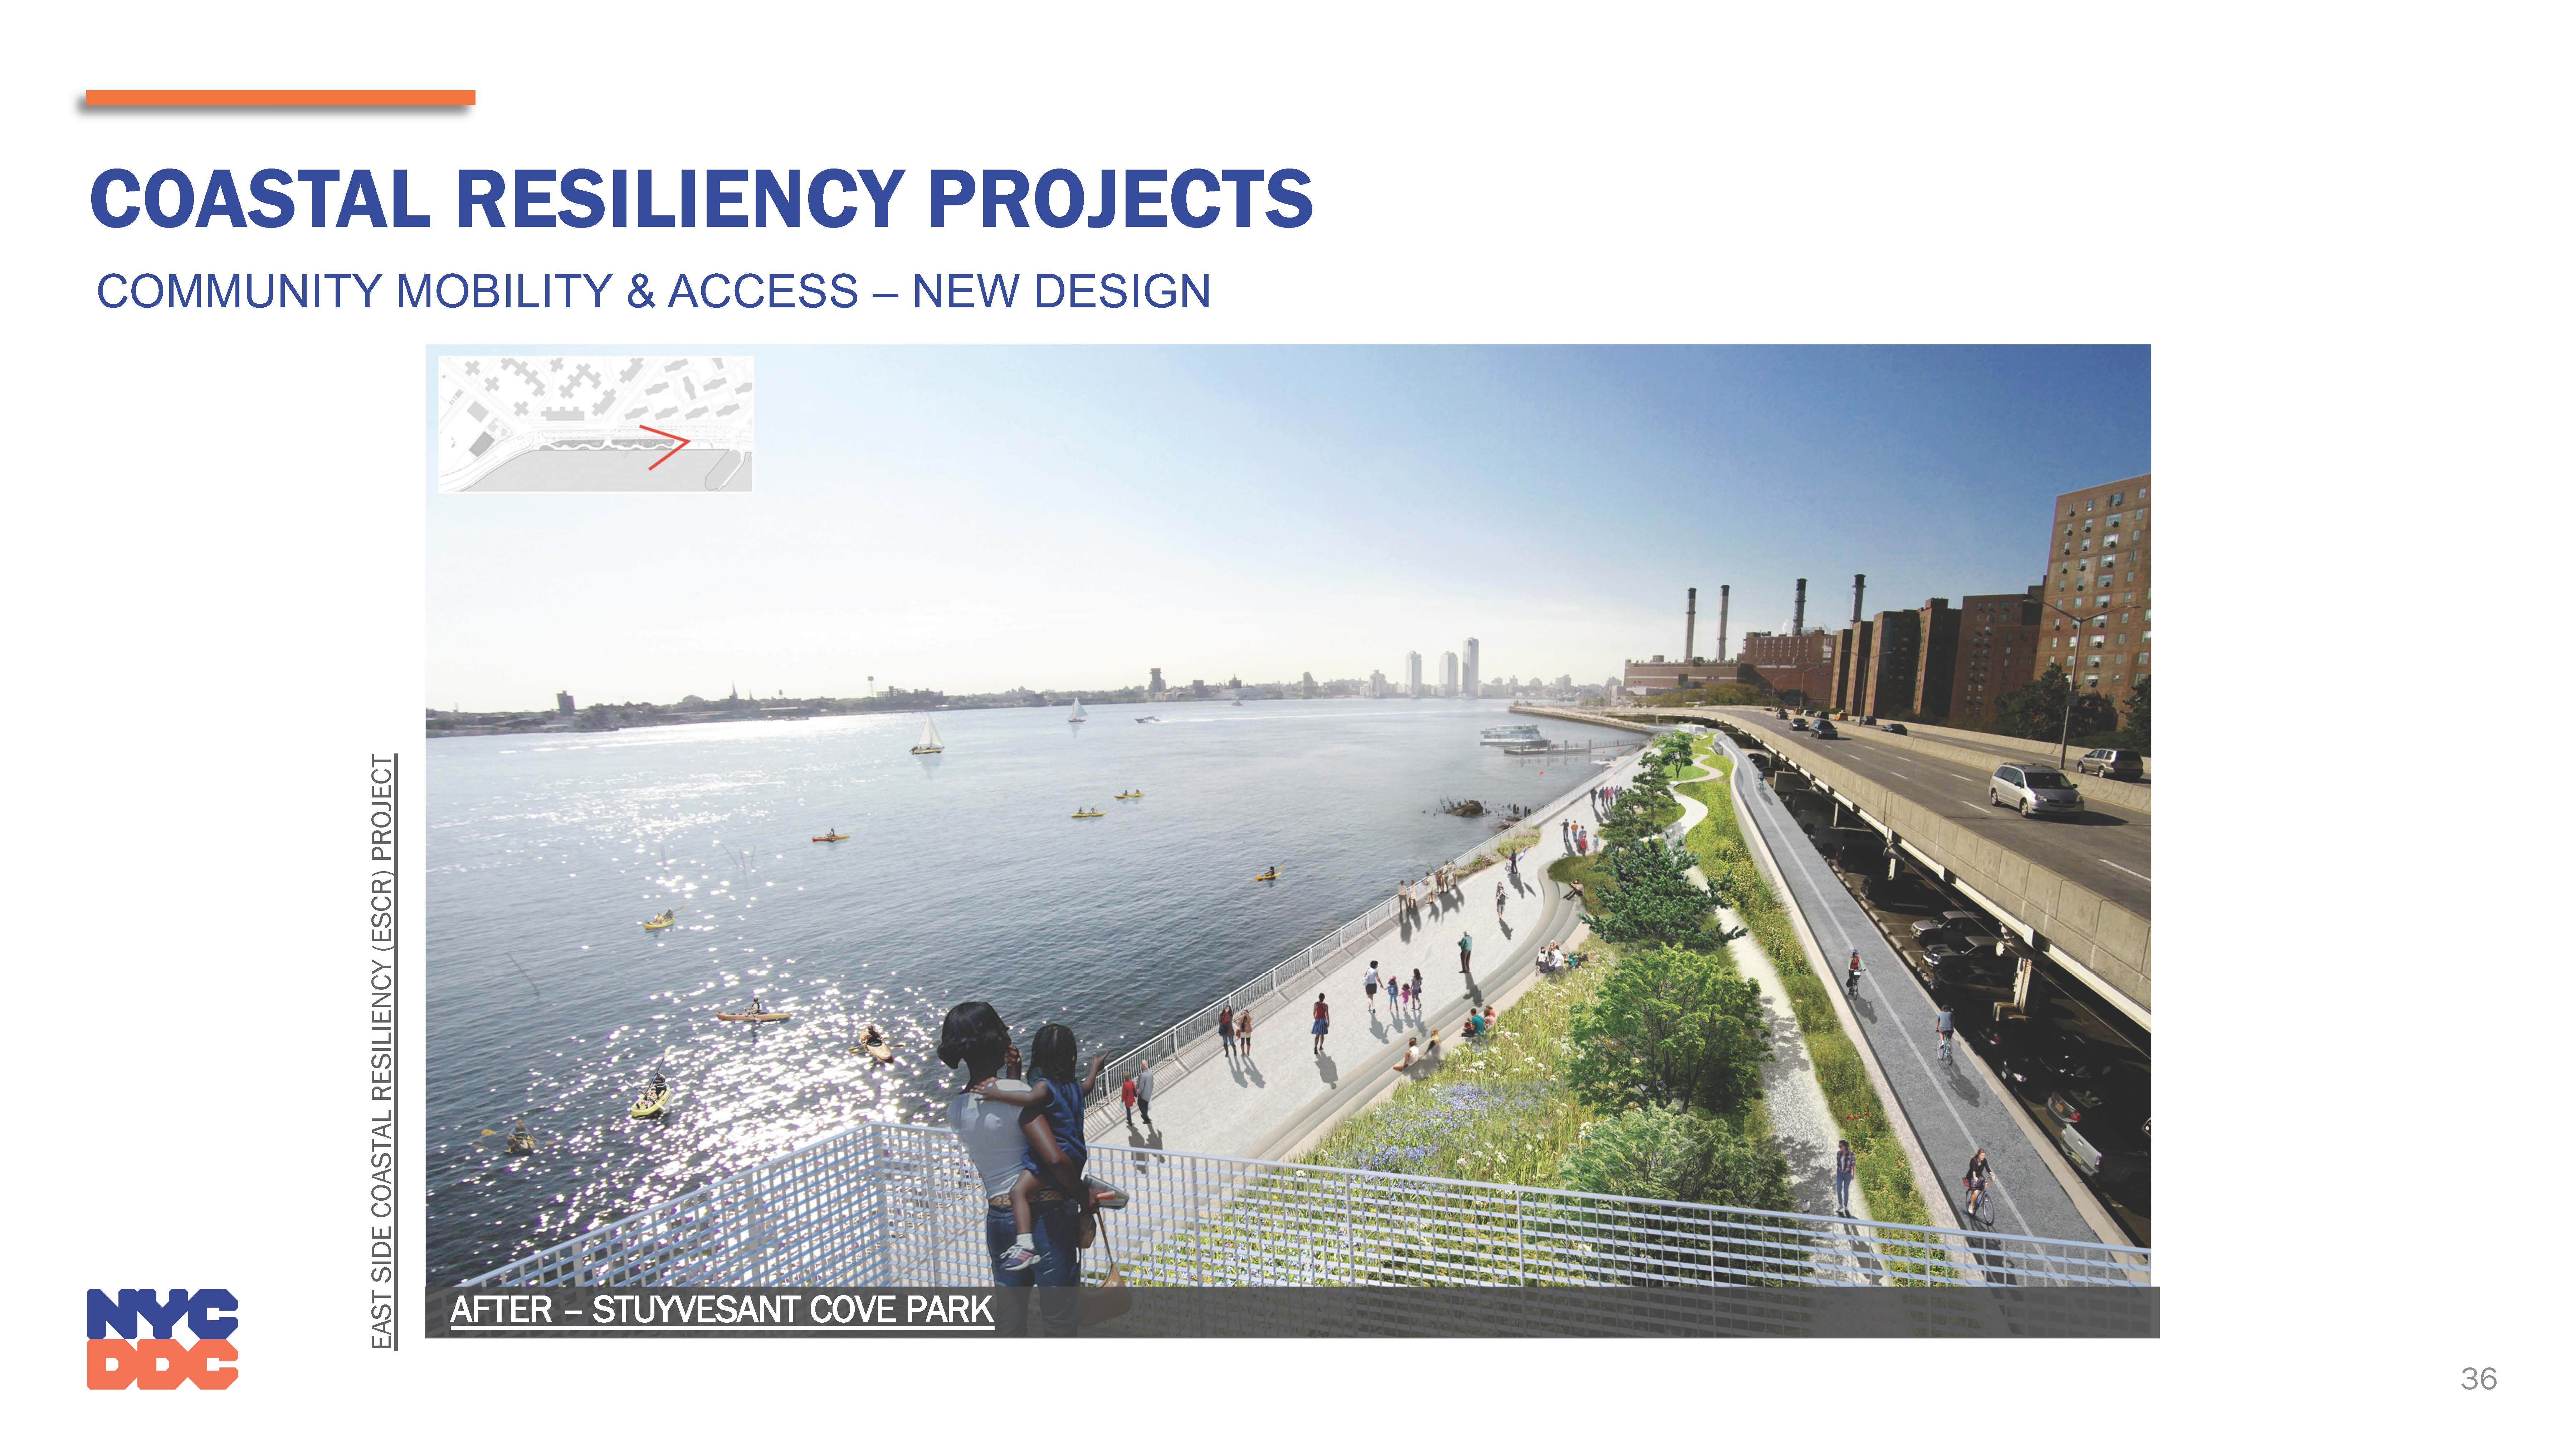 An artist rendering of Stuyvesant Cove after the completion of the ESCR project